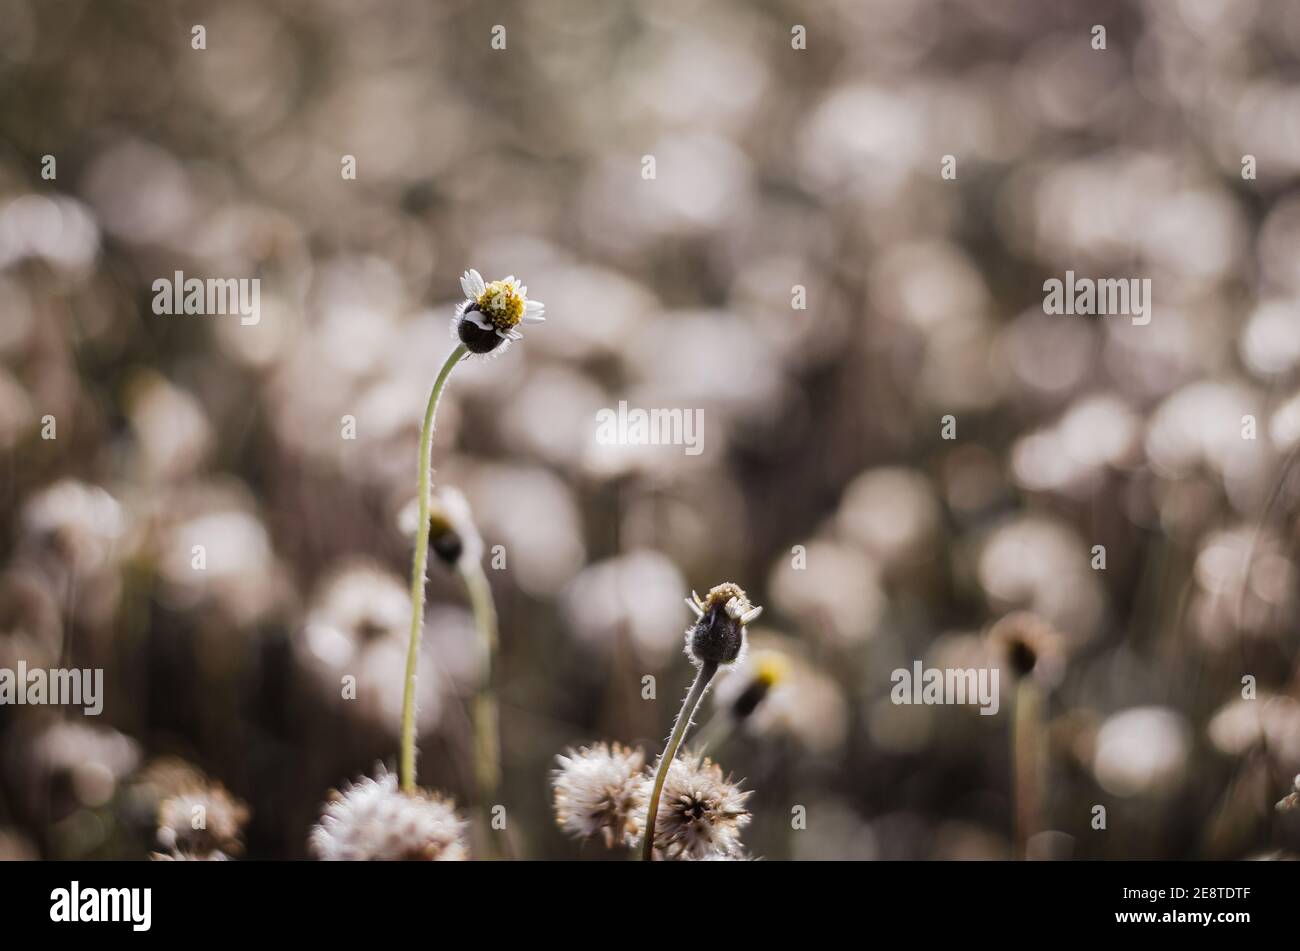 Coatbuttons Flower or Tridax Daisy with selective focus blooming in summer field. Stock Photo